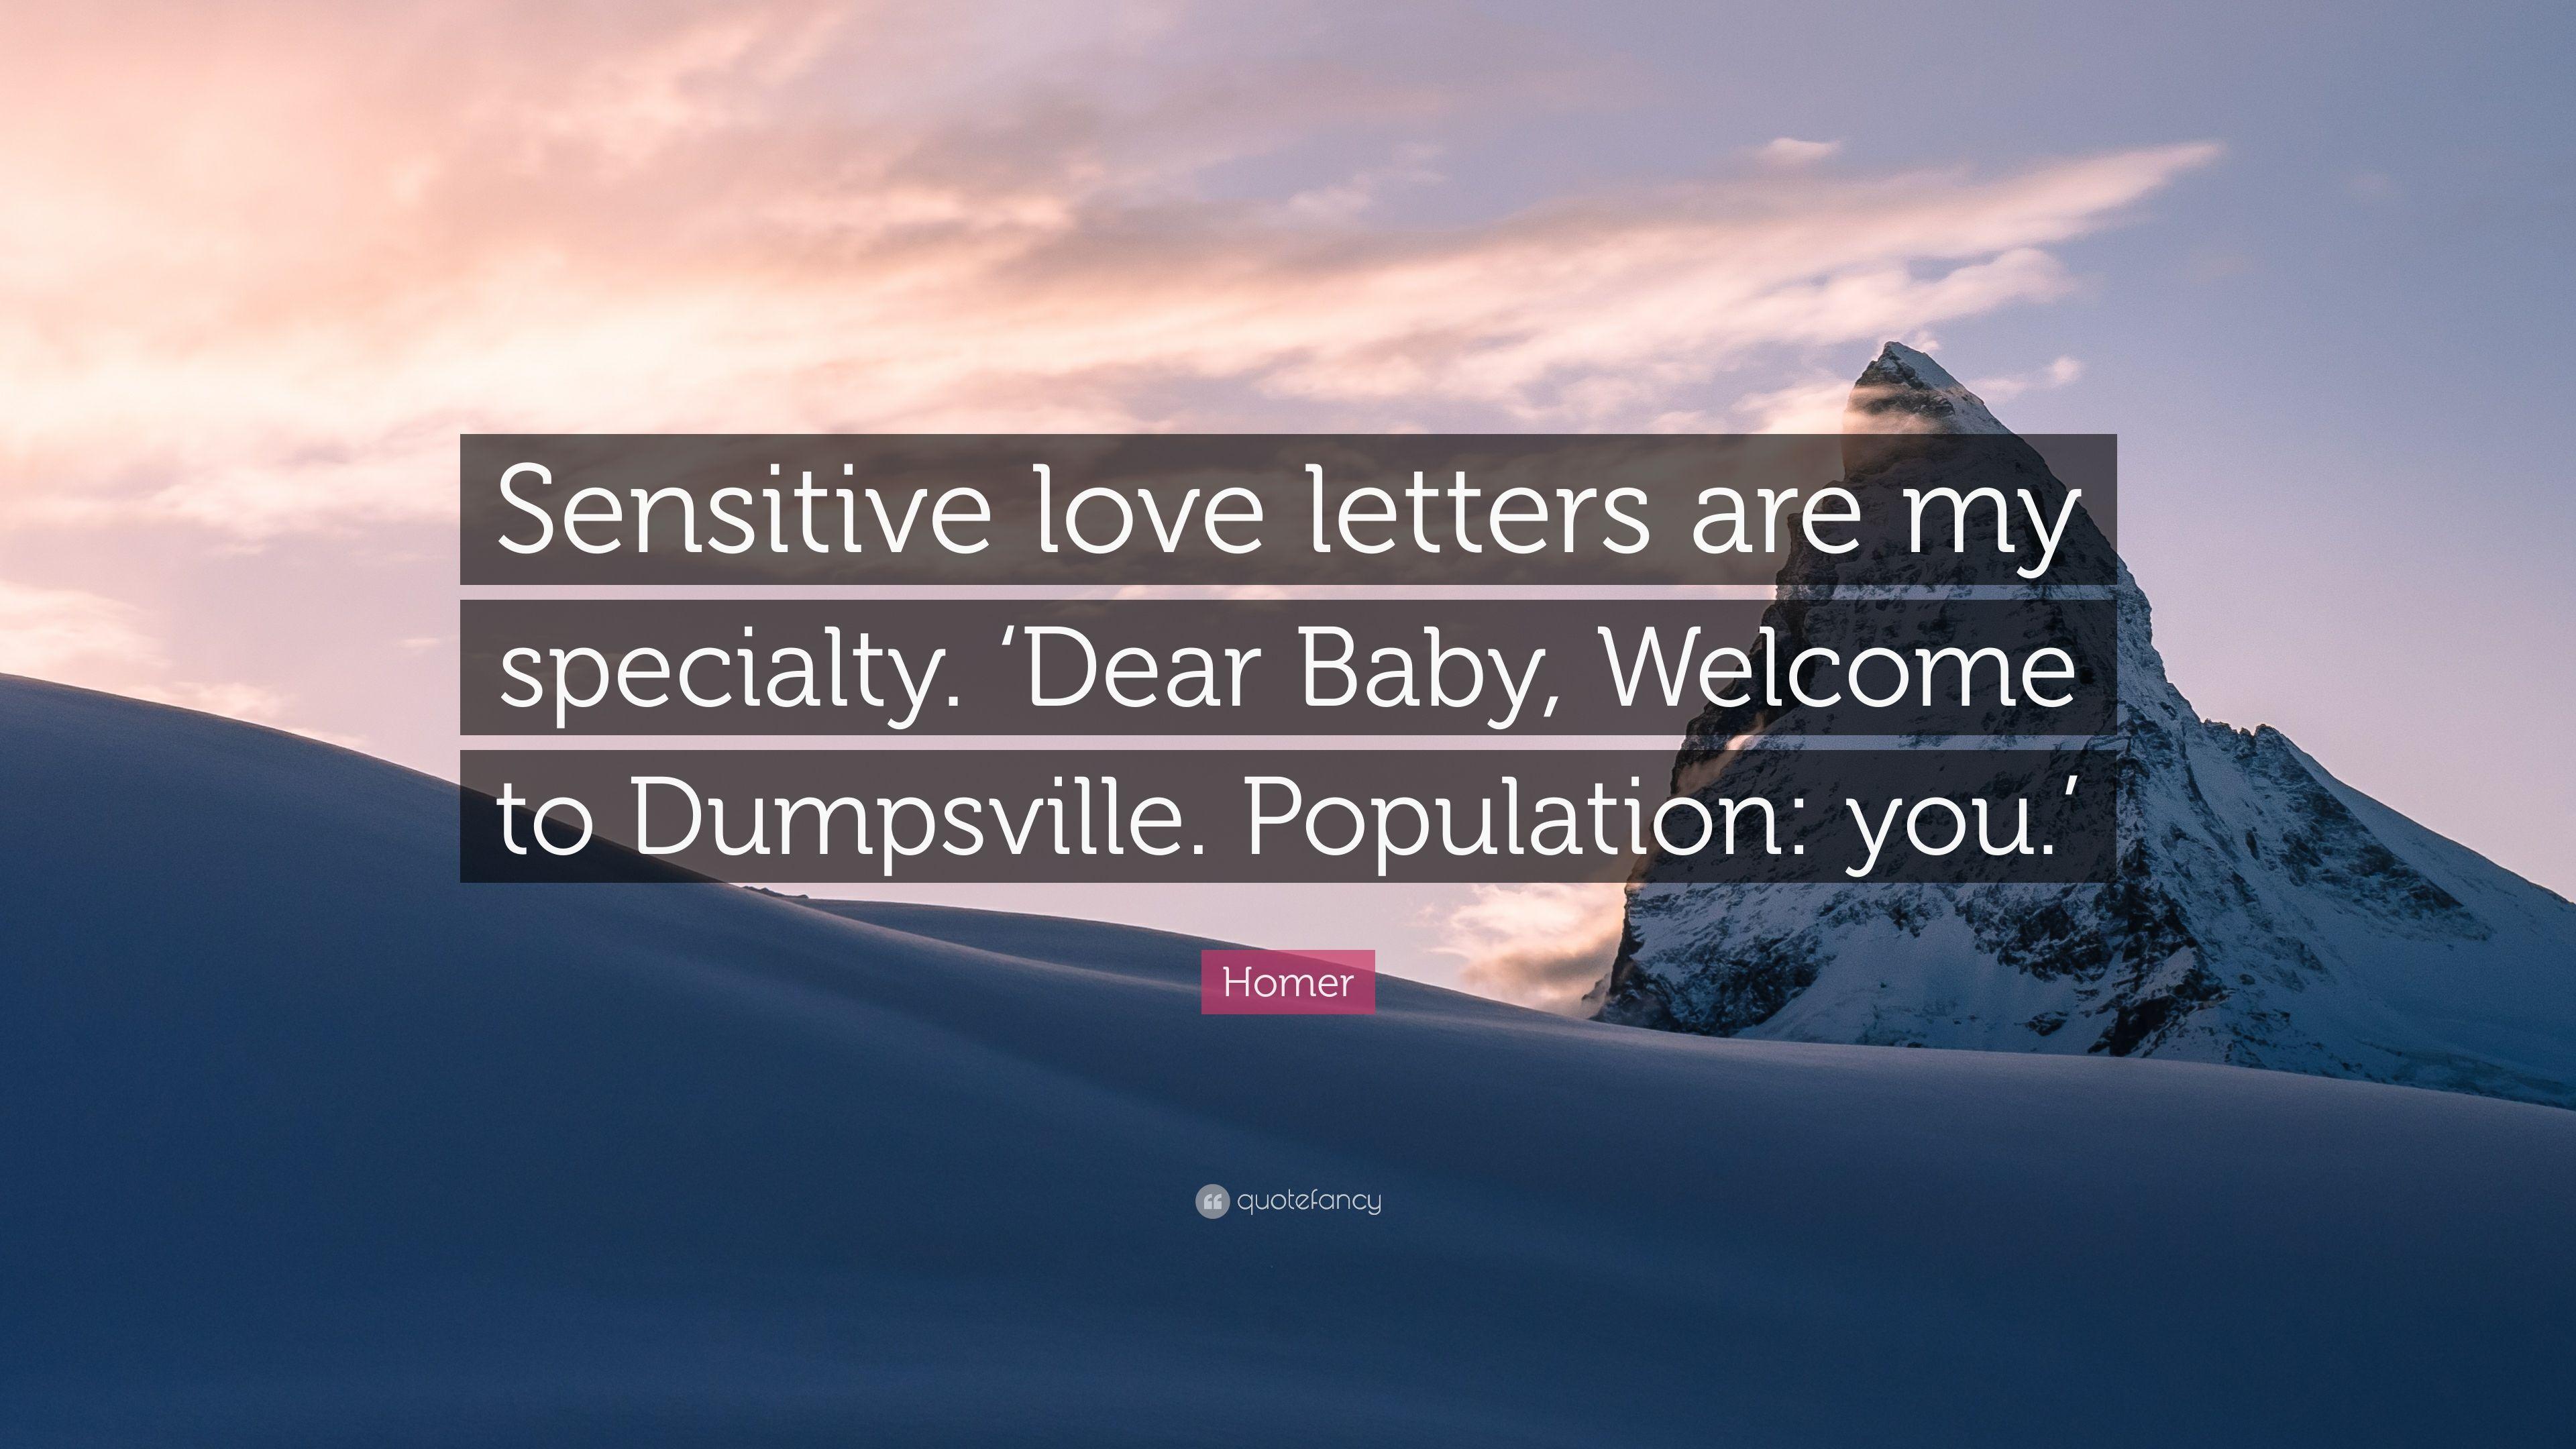 Homer Quote: “Sensitive love letters are my specialty. 'Dear Baby